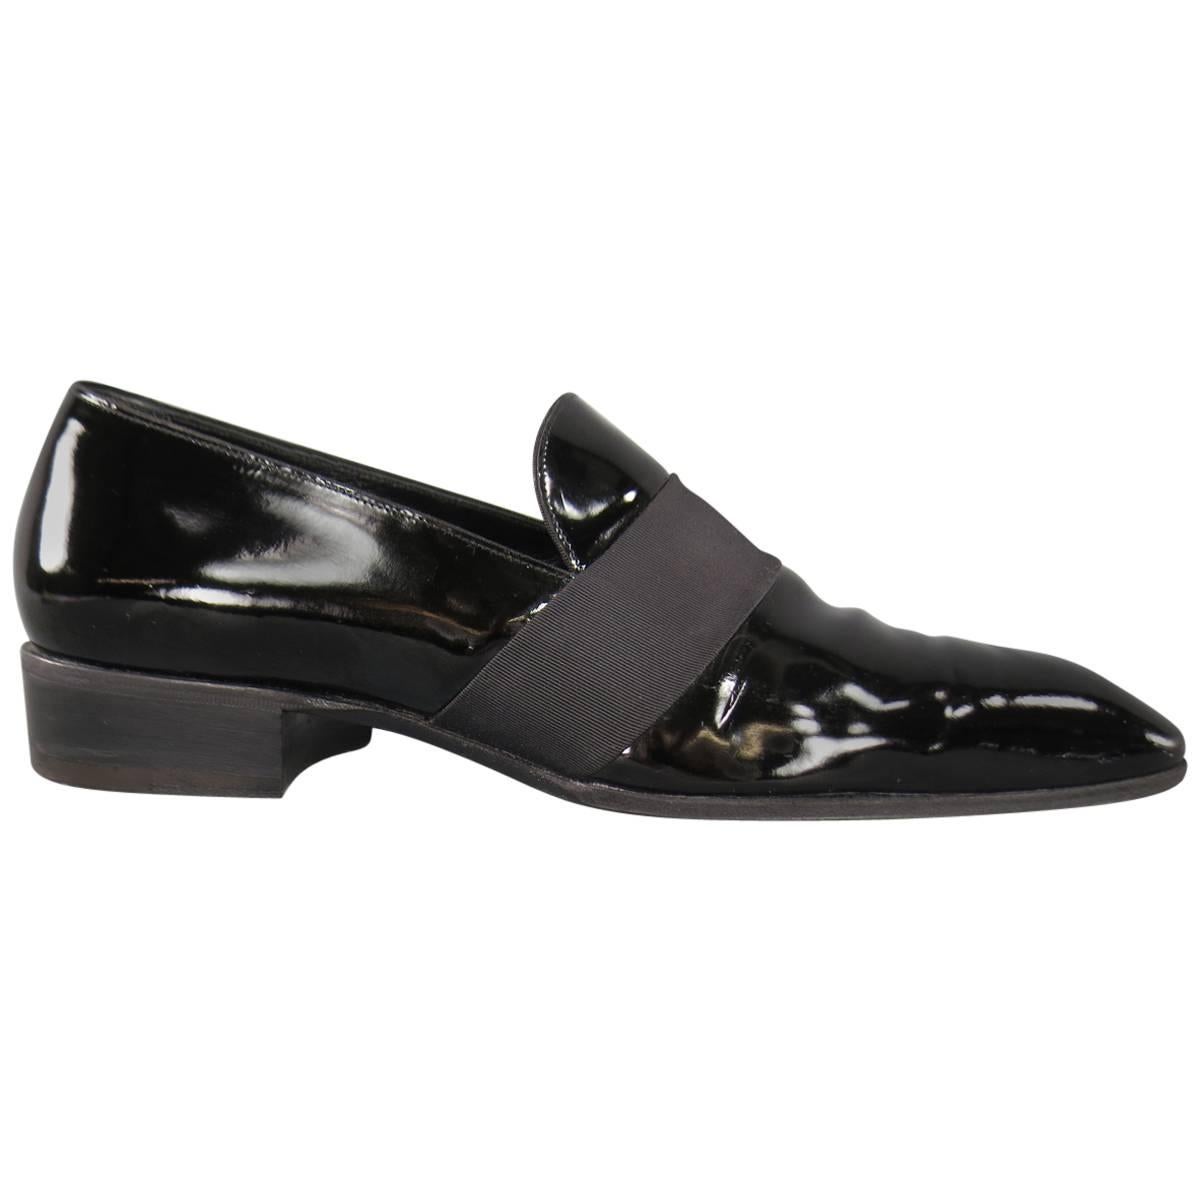 TOM FORD Size 9 Black Patent Leather Ribbon Band Tuxedo Loafers